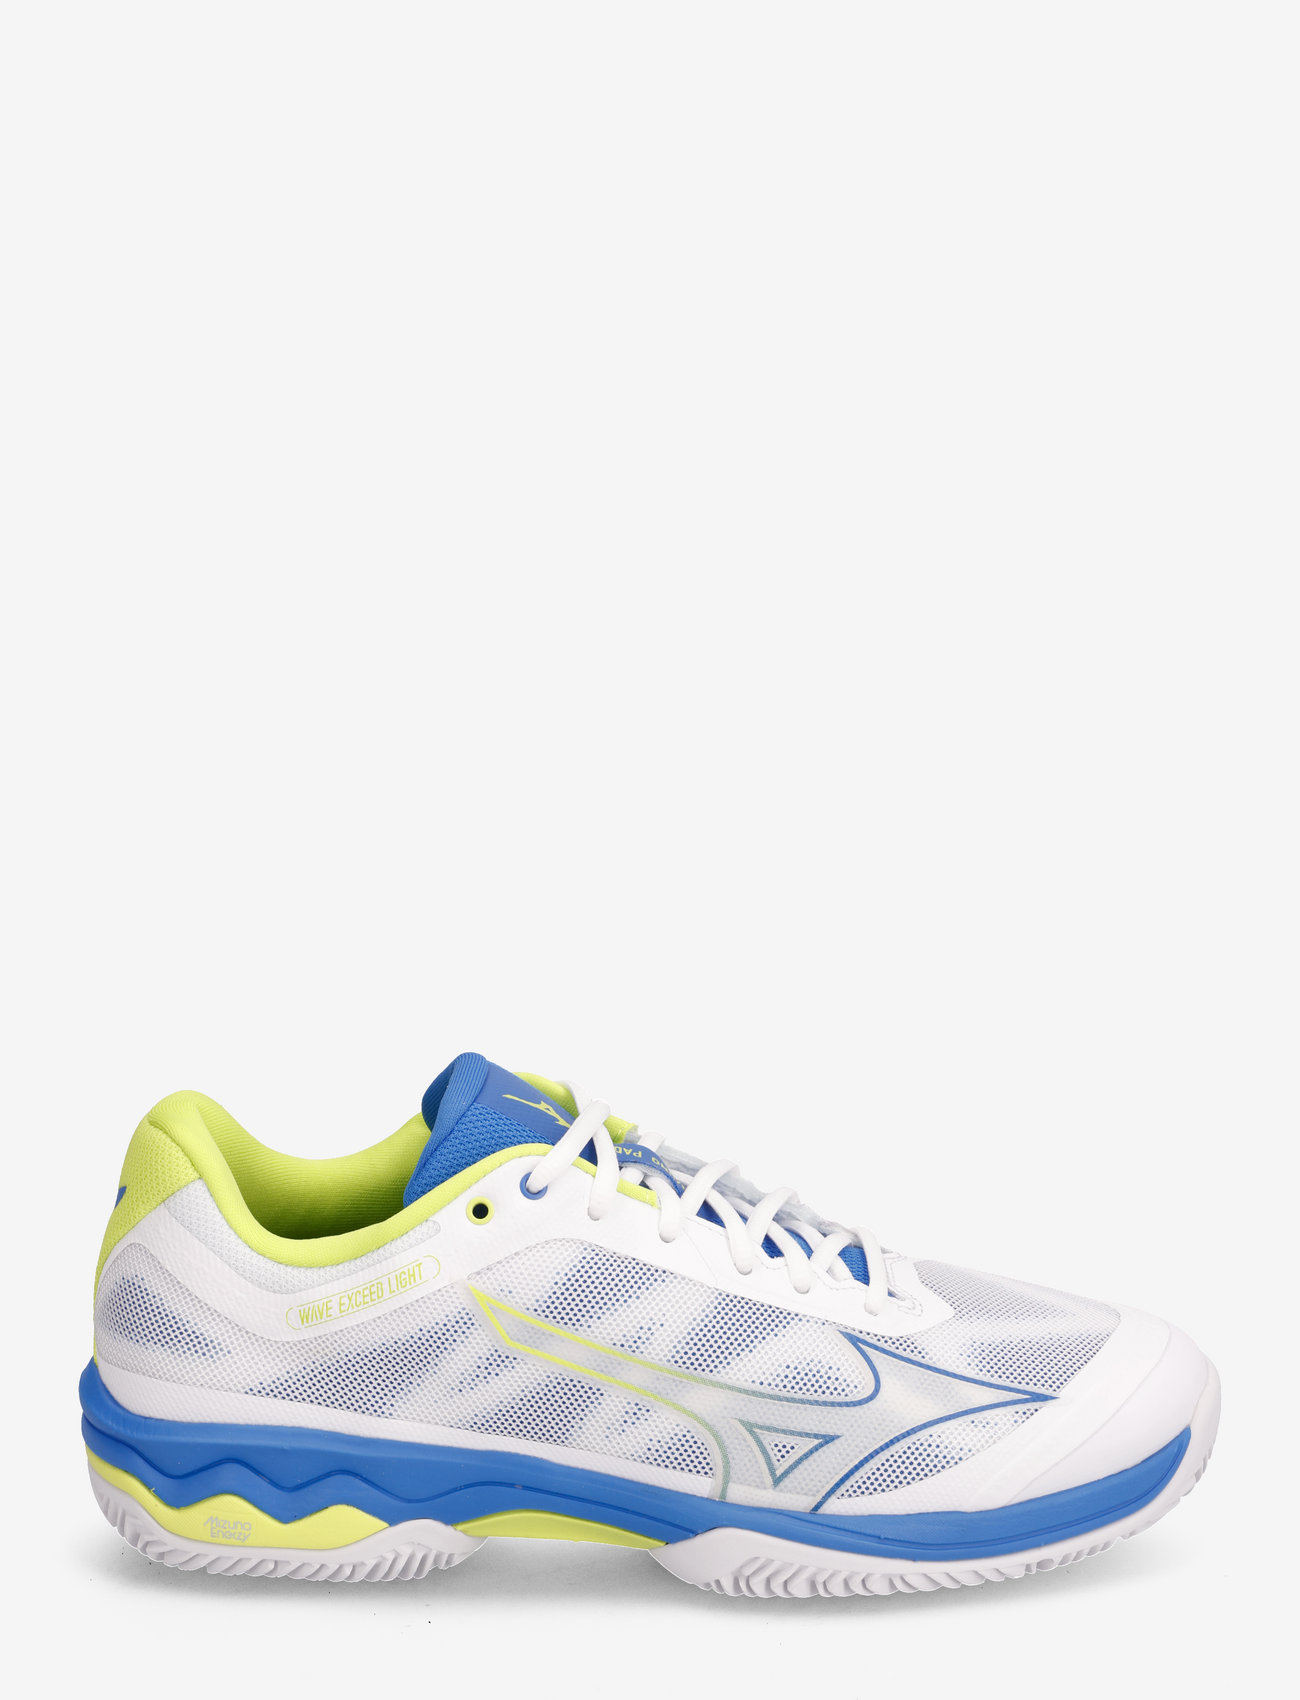 Mizuno - WAVE EXCEED LGTPADEL(M) - padel shoes - white/peace blue/acid lime - 1